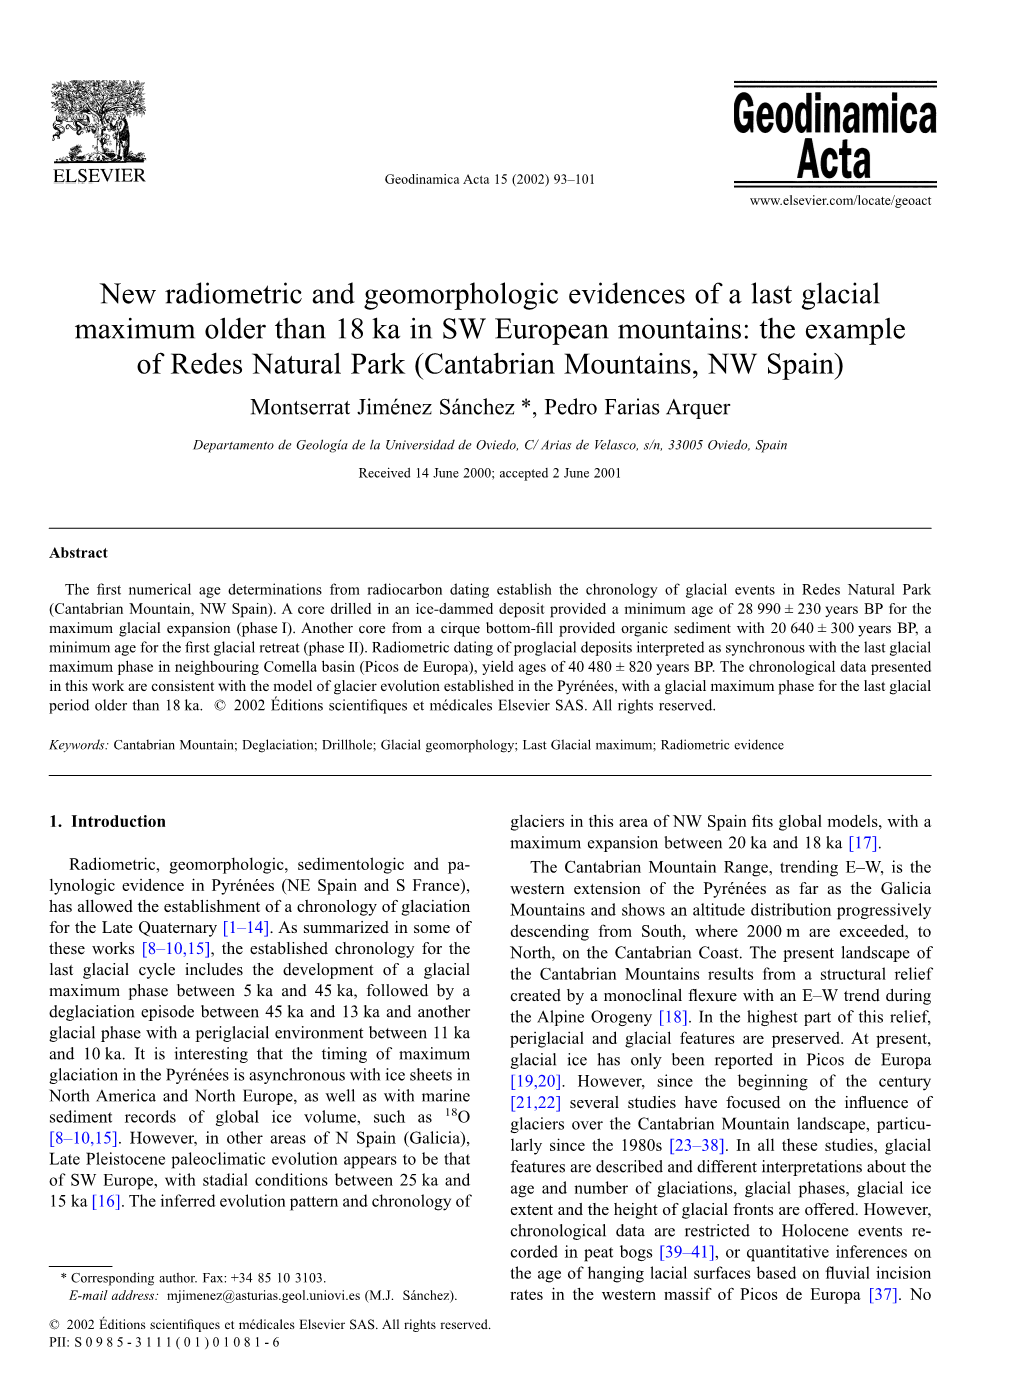 New Radiometric and Geomorphologic Evidences of a Last Glacial Maximum Older Than 18 Ka in SW European Mountains: the Example Of